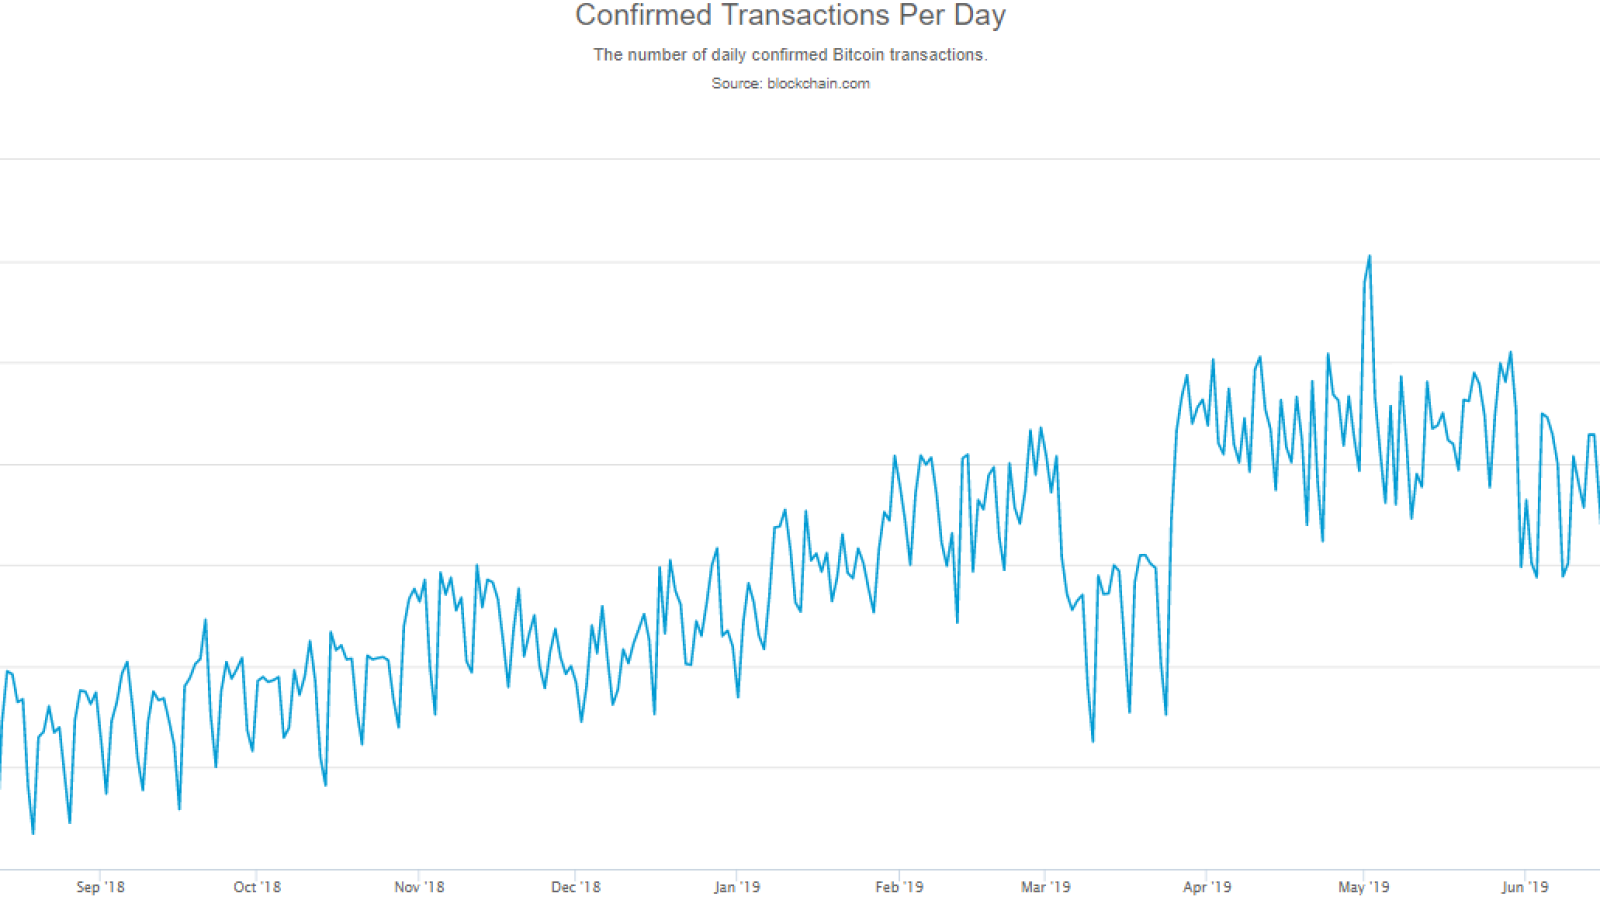 Confirmed transactions per day